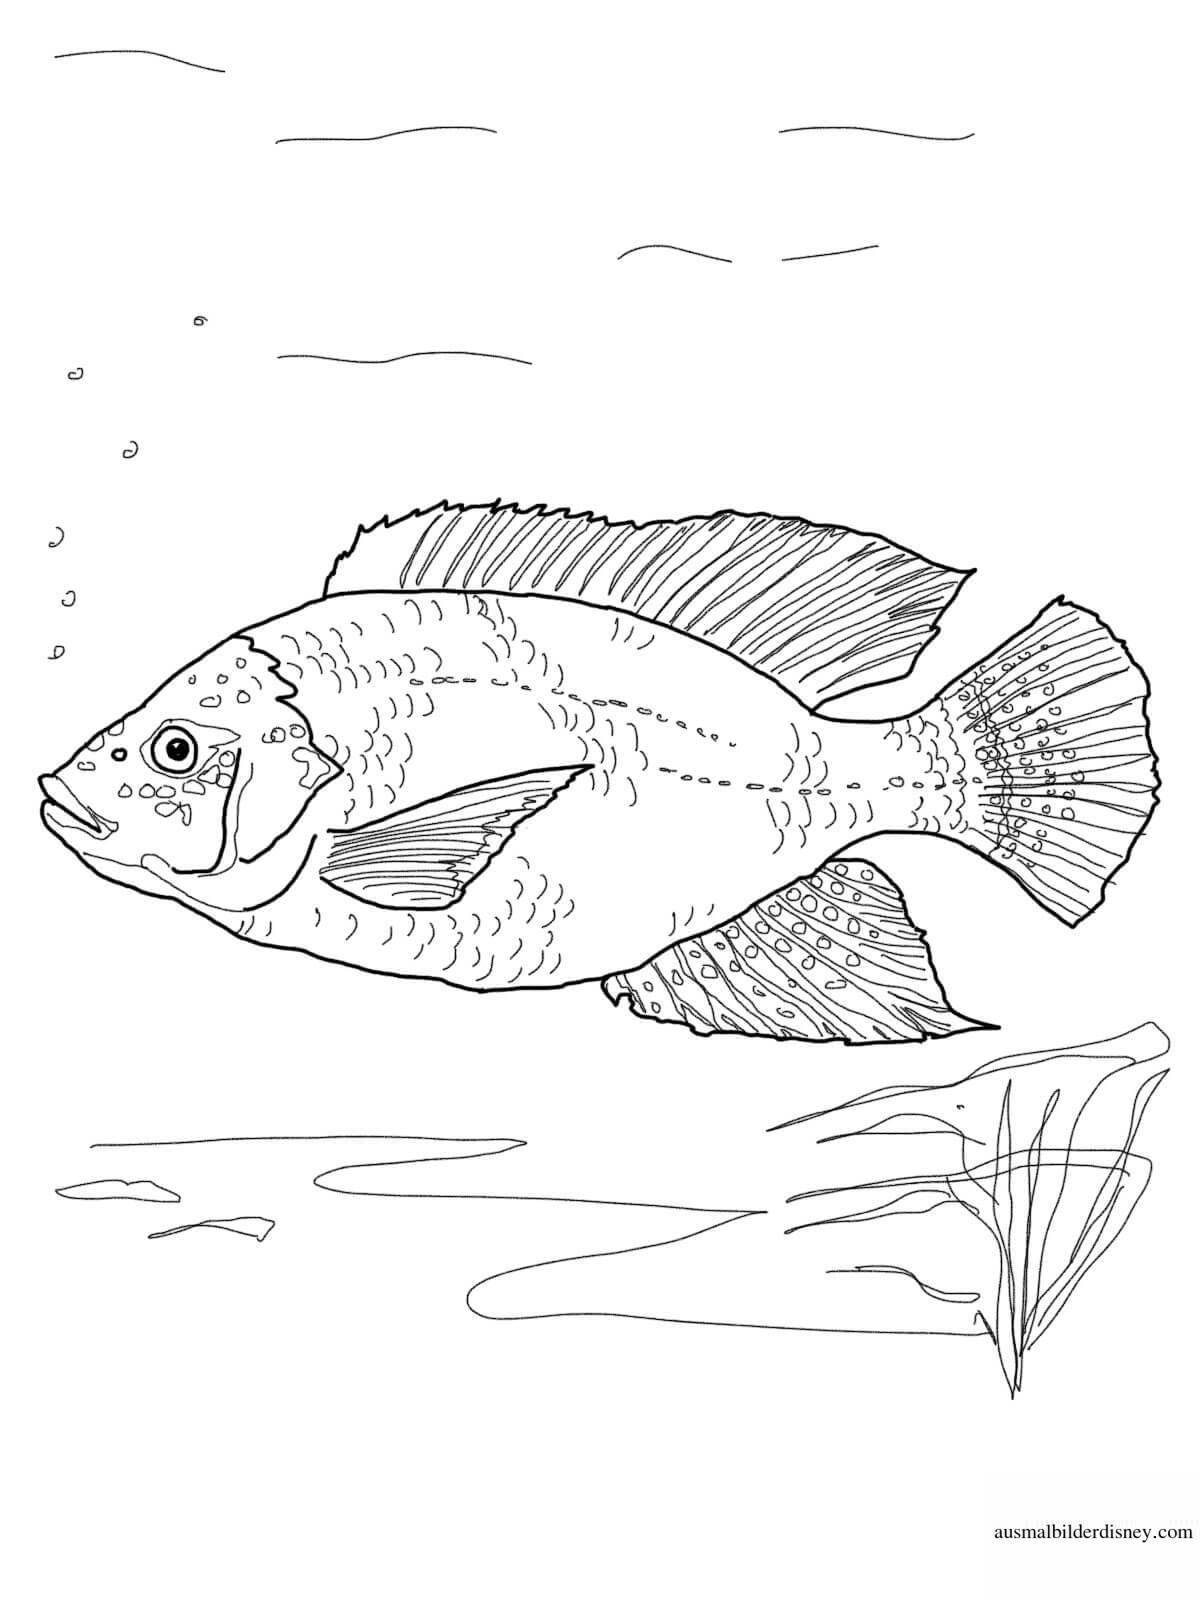 Coloring page amazing river fish